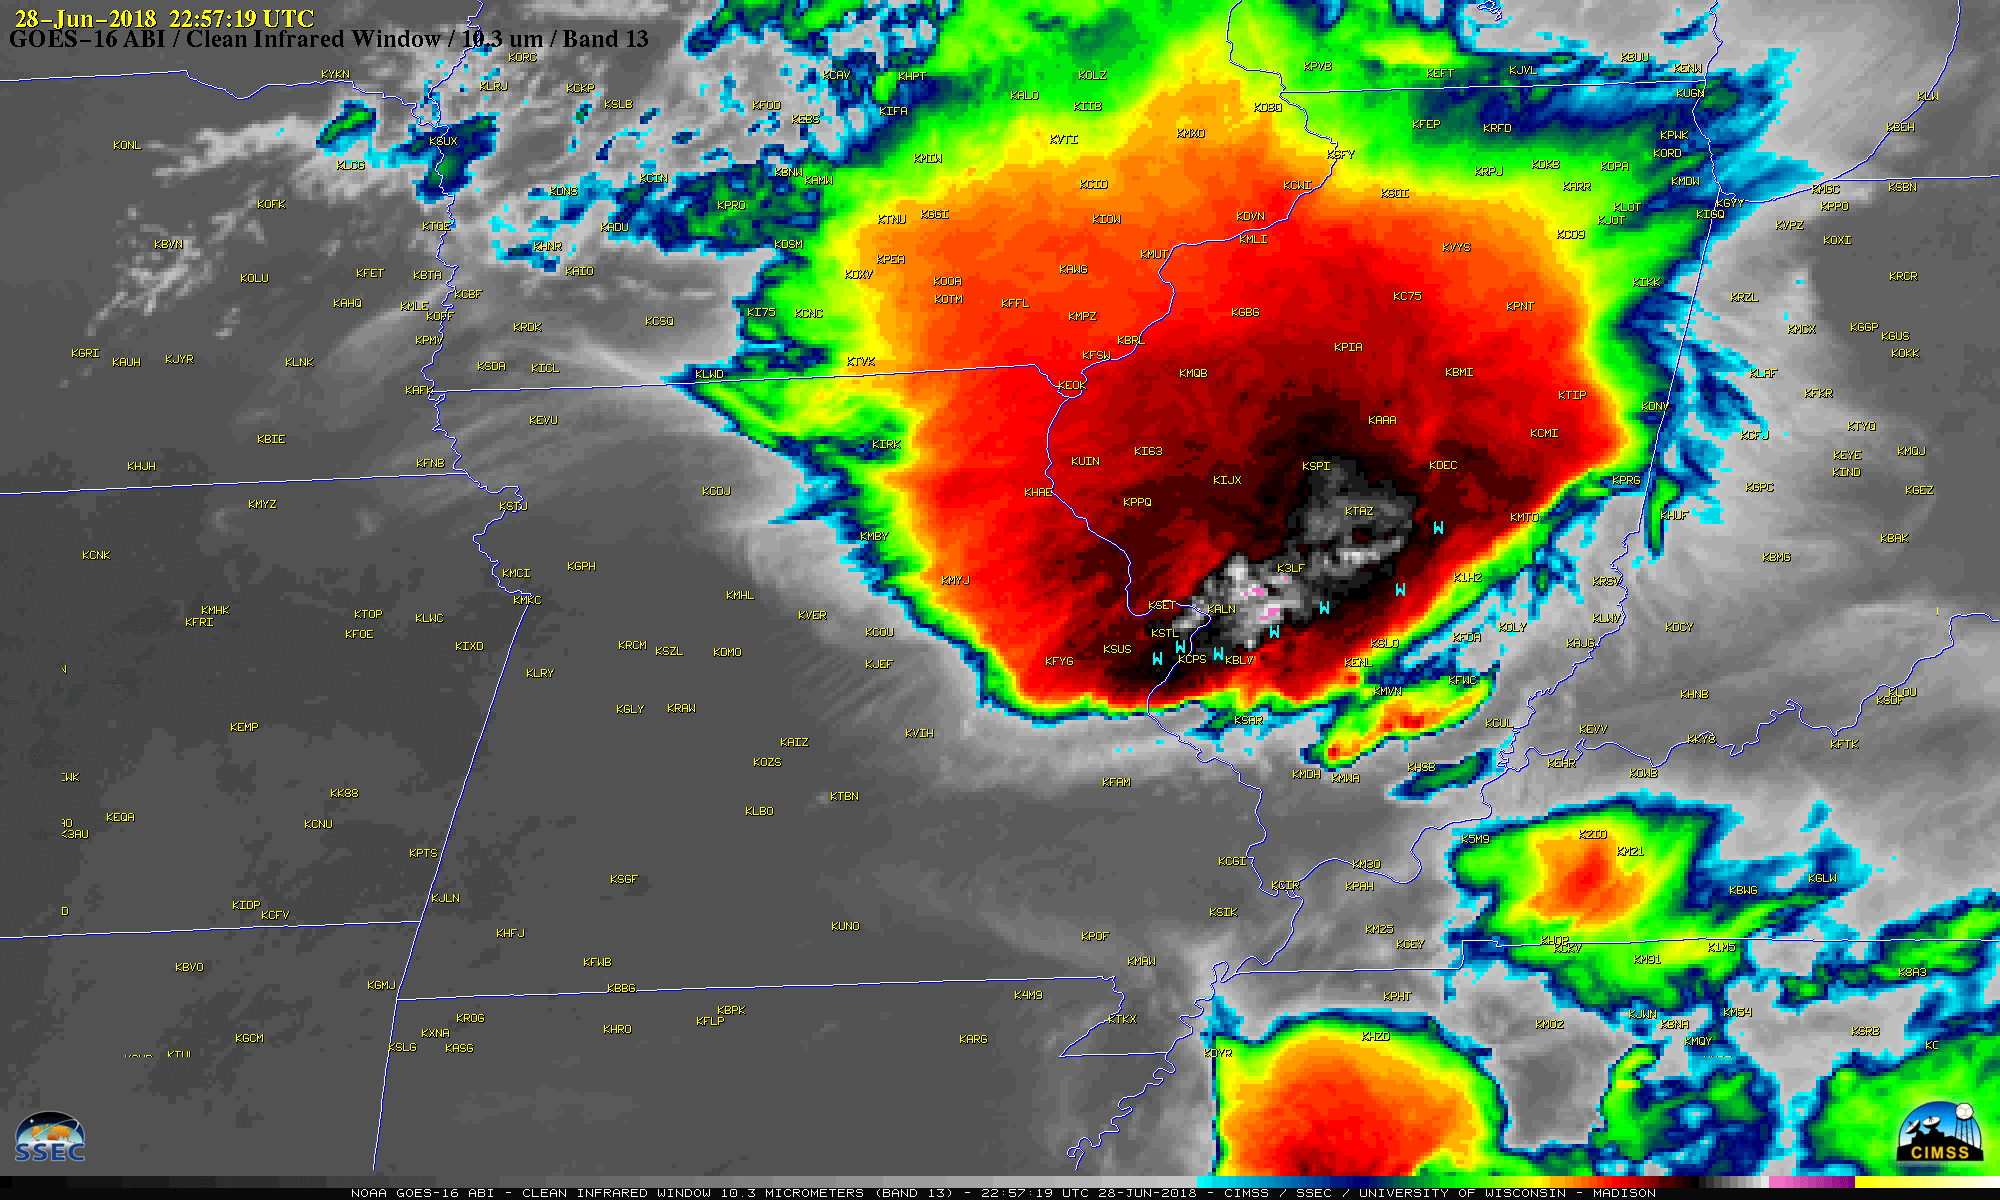 GOES-16 "Clean" Infrared Window (10.3 µm) images, with SPC storm reports plotted in cyan [click to play MP4 animation]